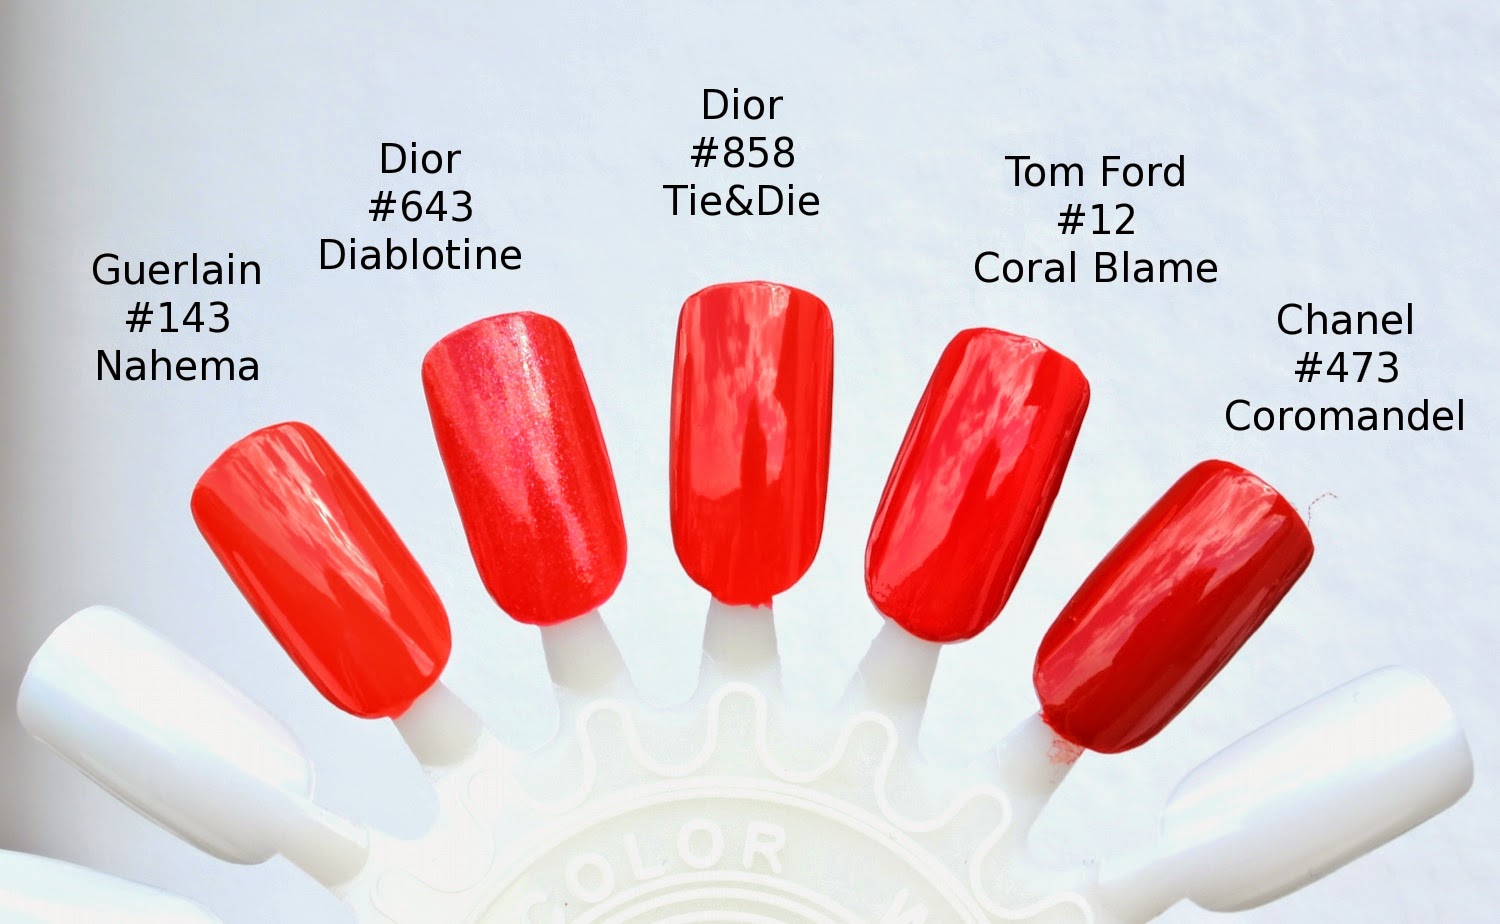 Dior Vernis #858 Tie & Dye from 2013 Summer Mix Collection | Color Me Loud